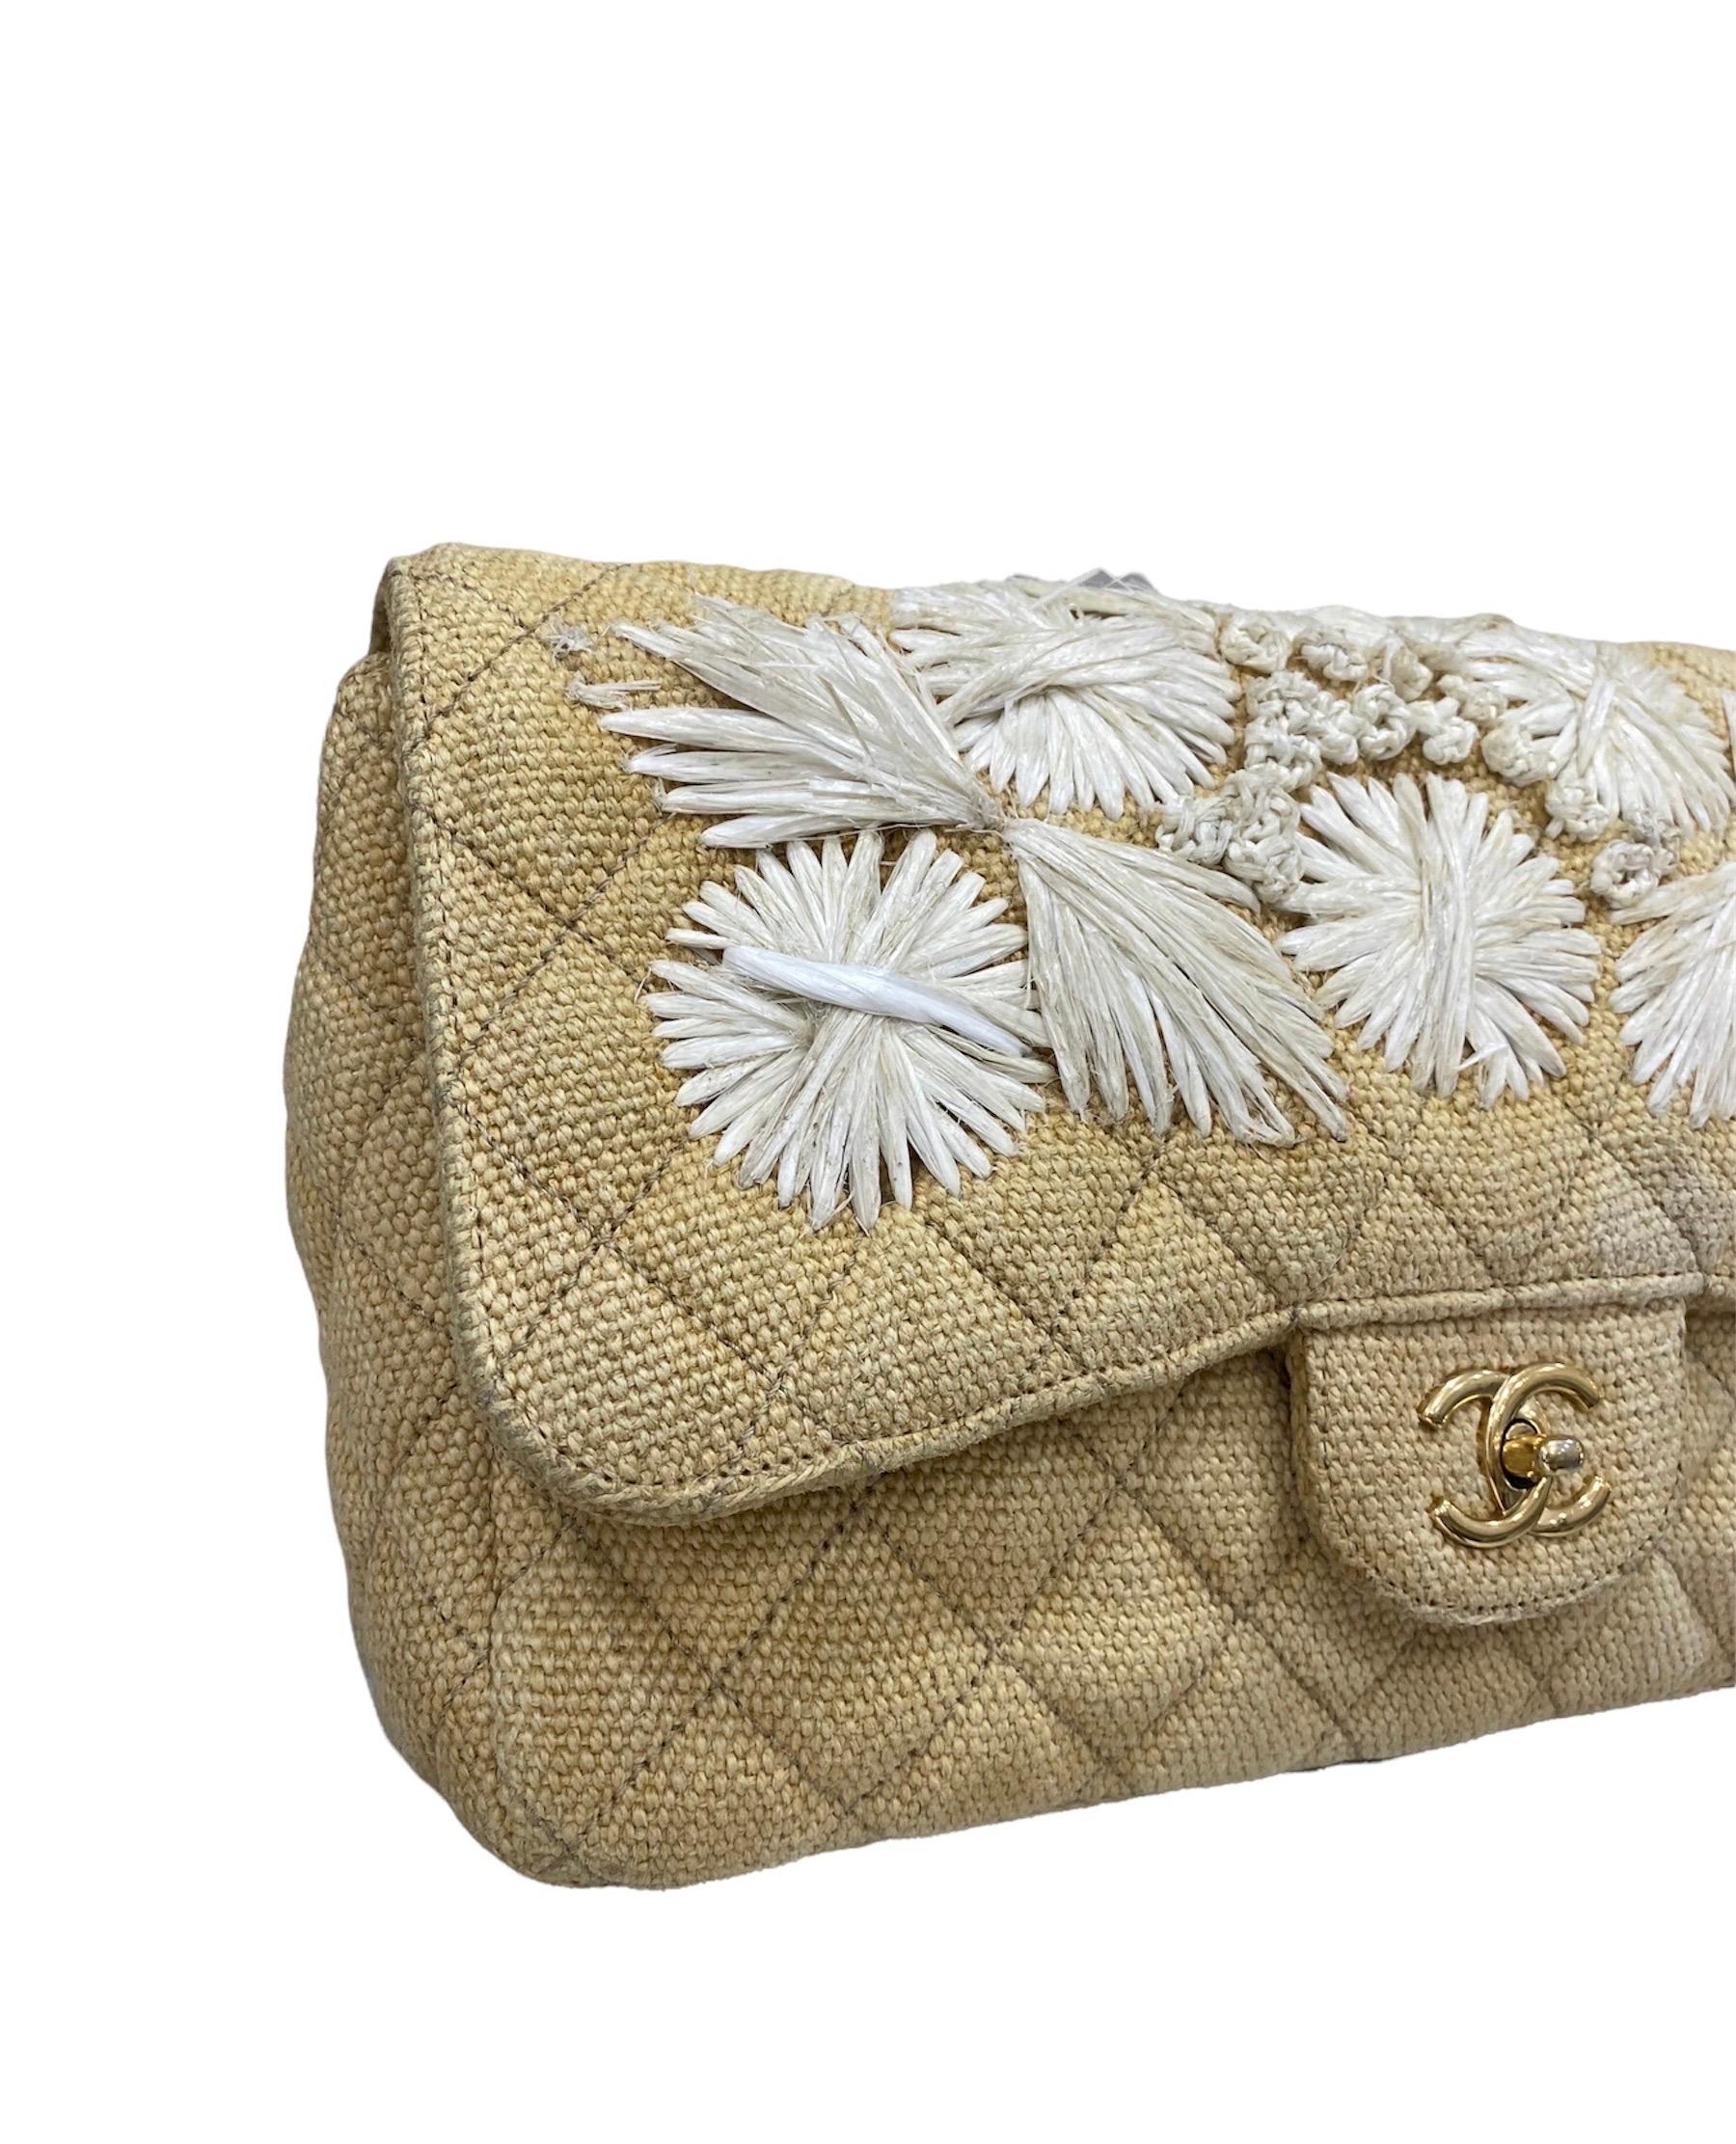 Chanel signed bag, Jumbo model, made of beige canvas with floral embroidery on the front and golden hardware.
Equipped with a flap with interlocking CC logo closure, internally lined in beige satin, very roomy.
Equipped with a sliding shoulder strap